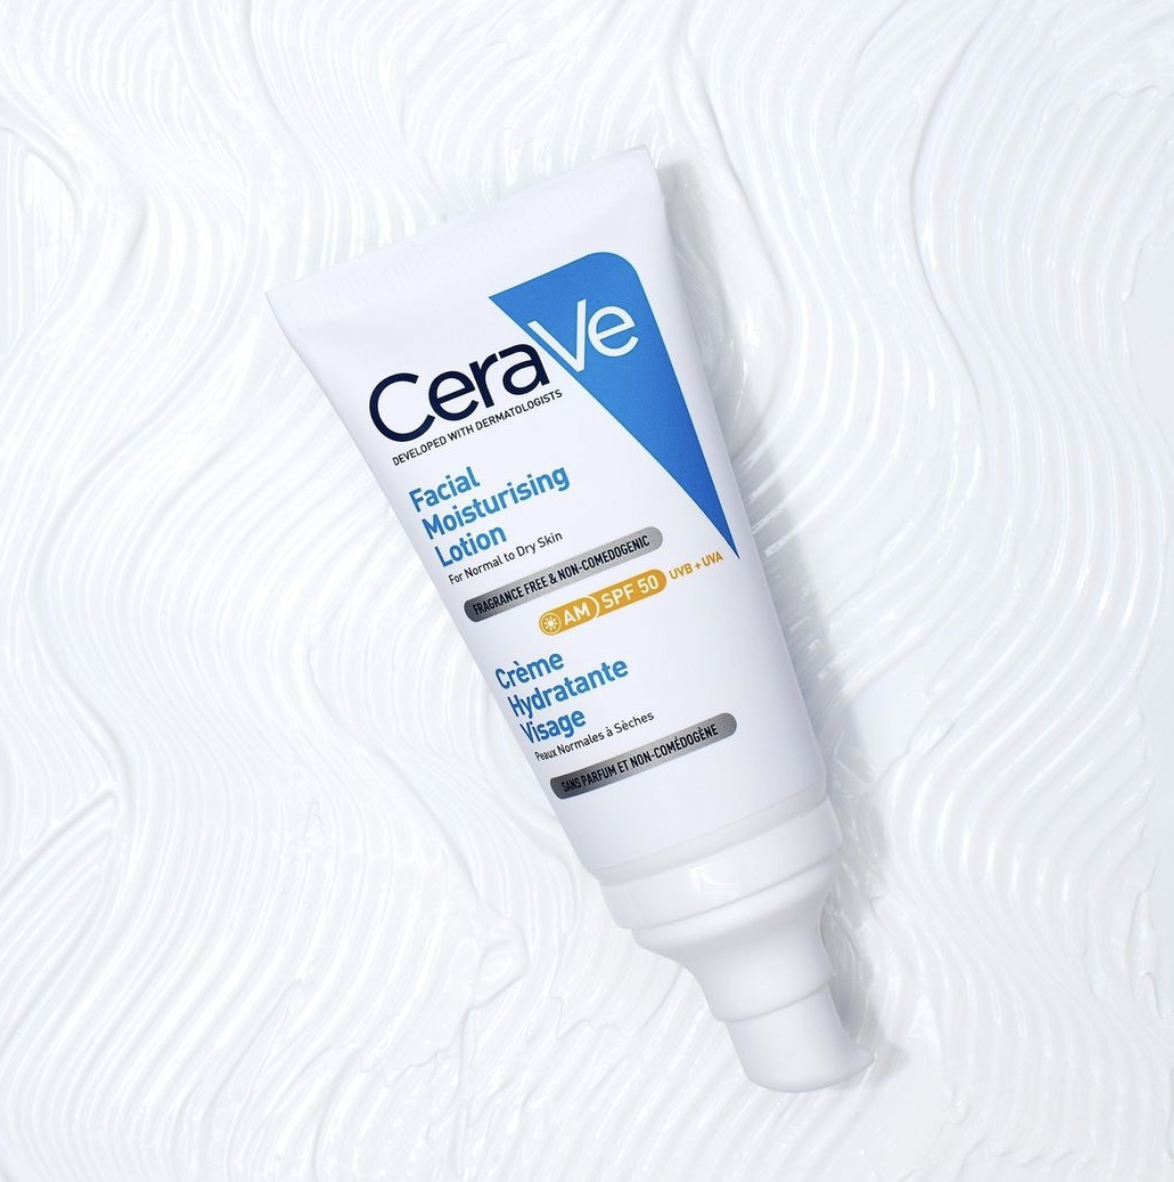 CeraVe Facial Moisturising Lotion with SPF50